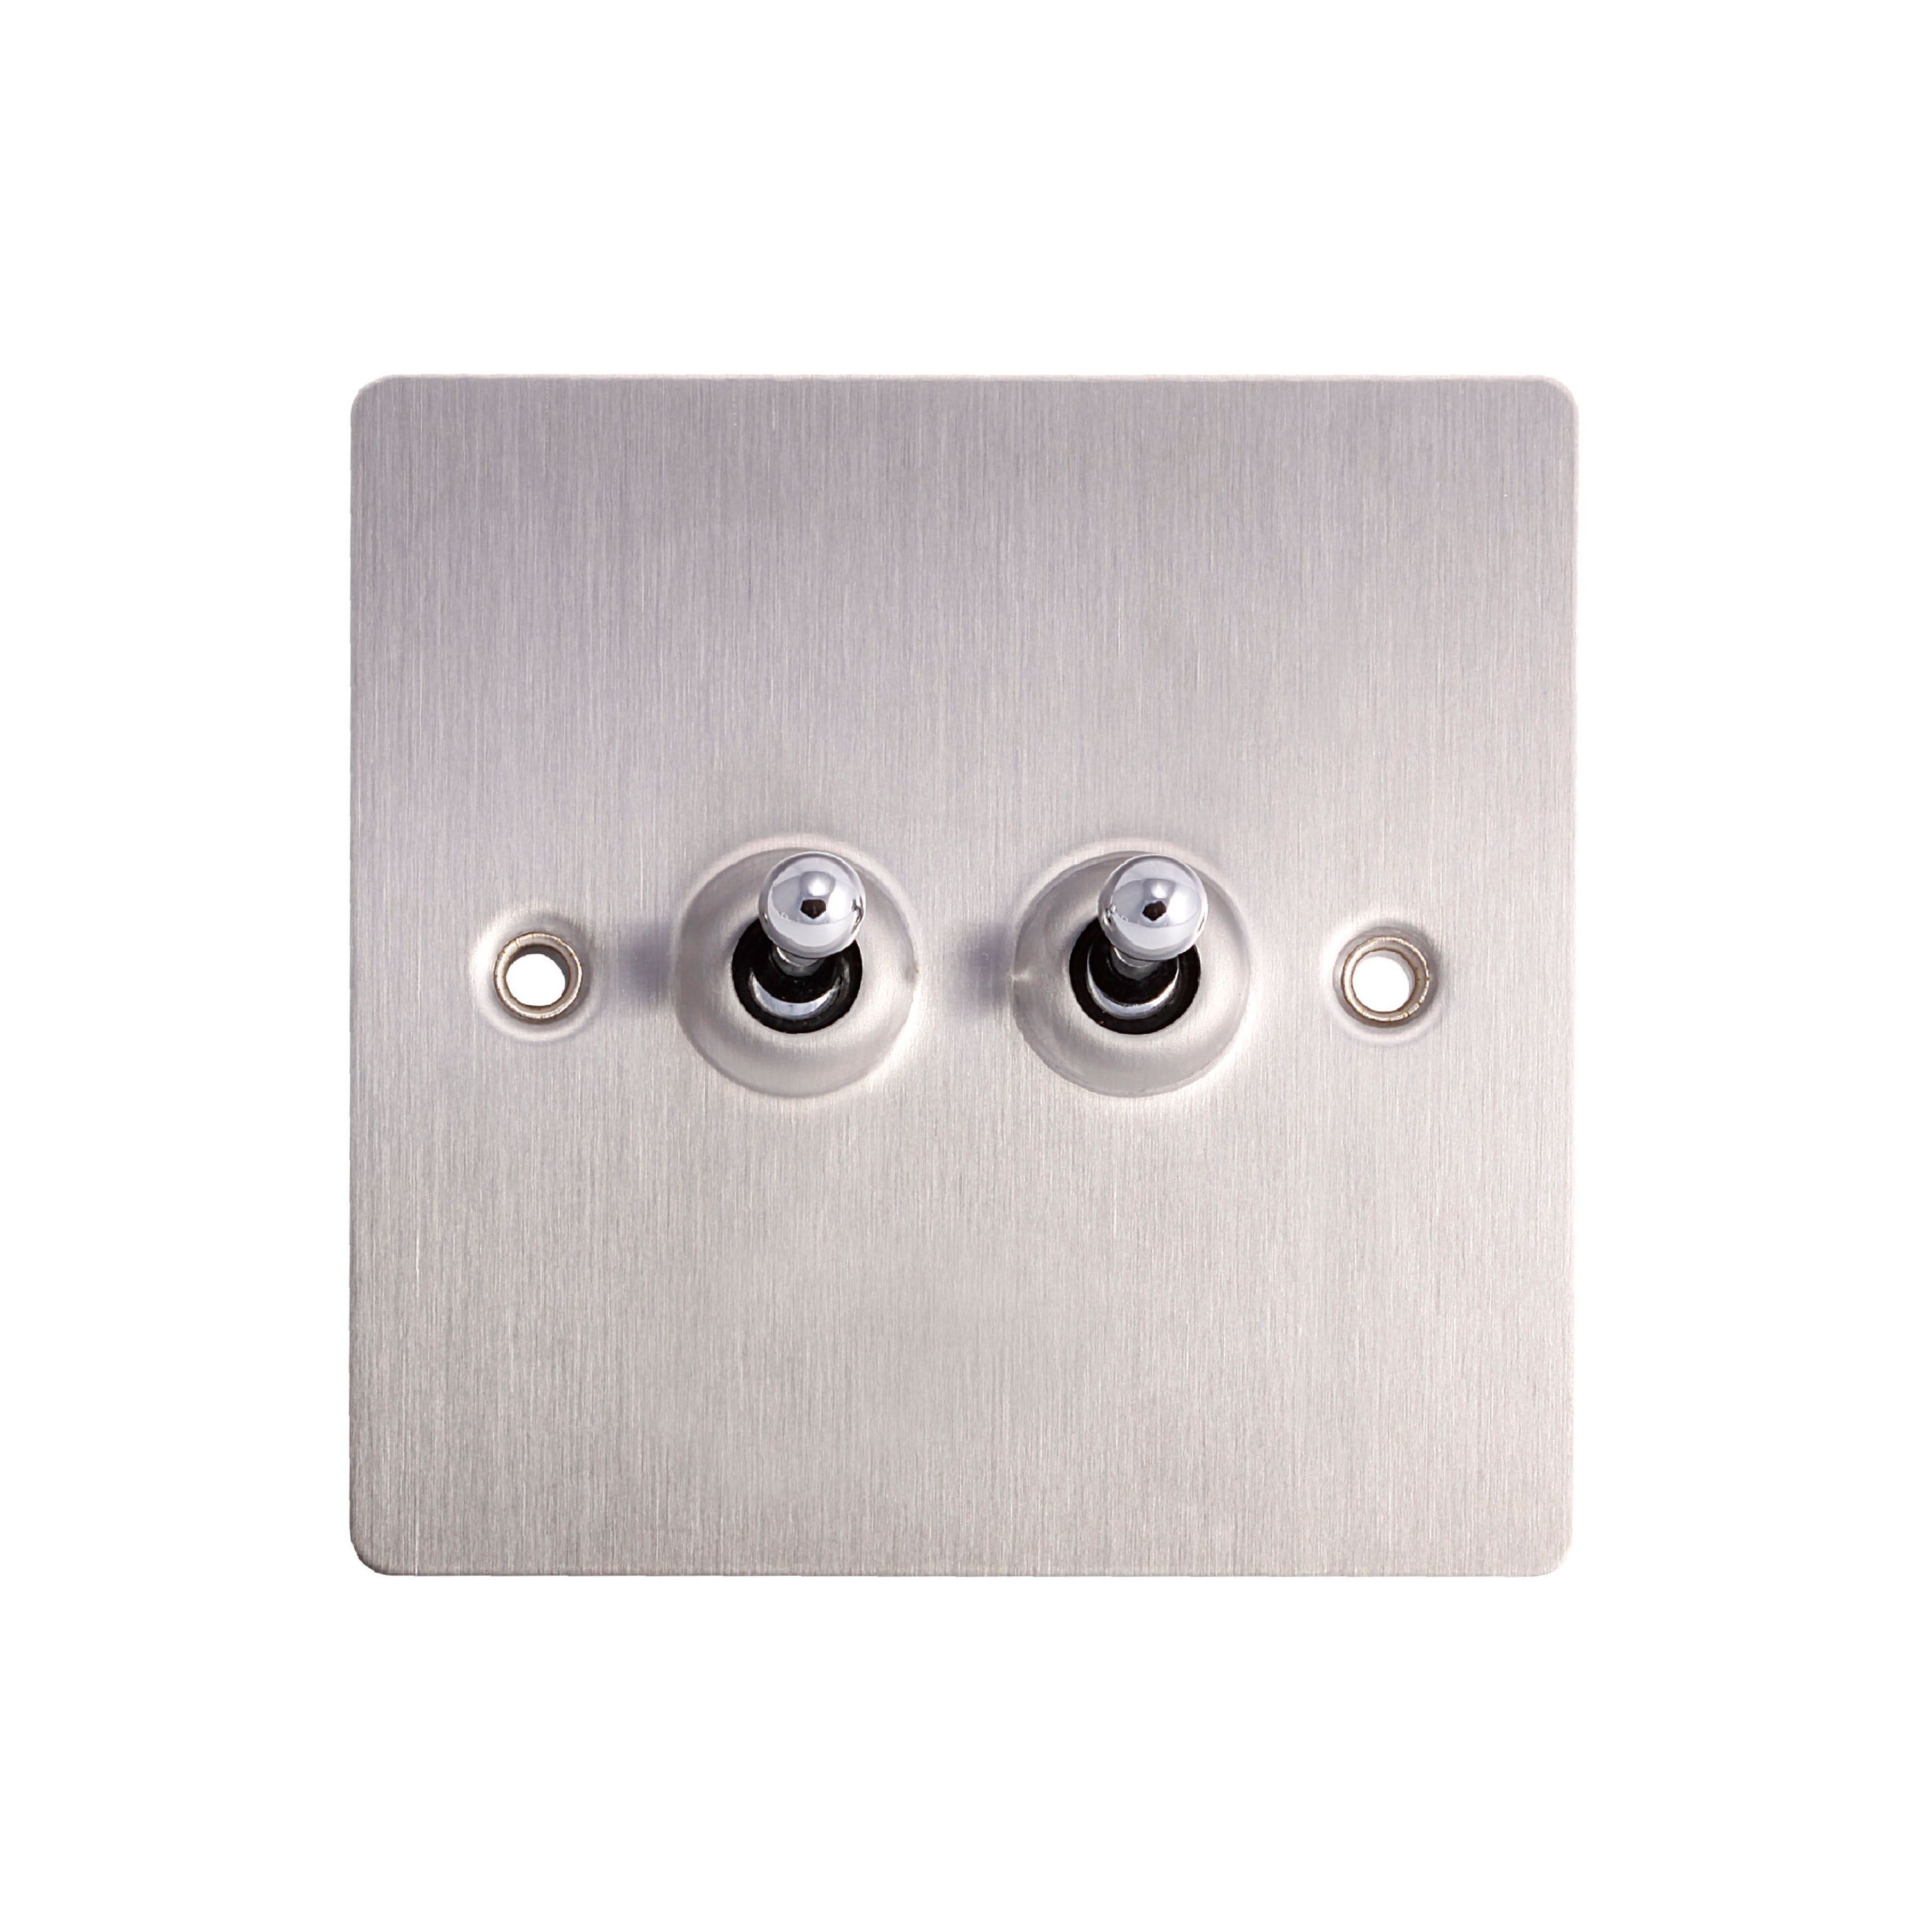 Holder Stainless steel effect Double 10A 2 way Toggle Switch